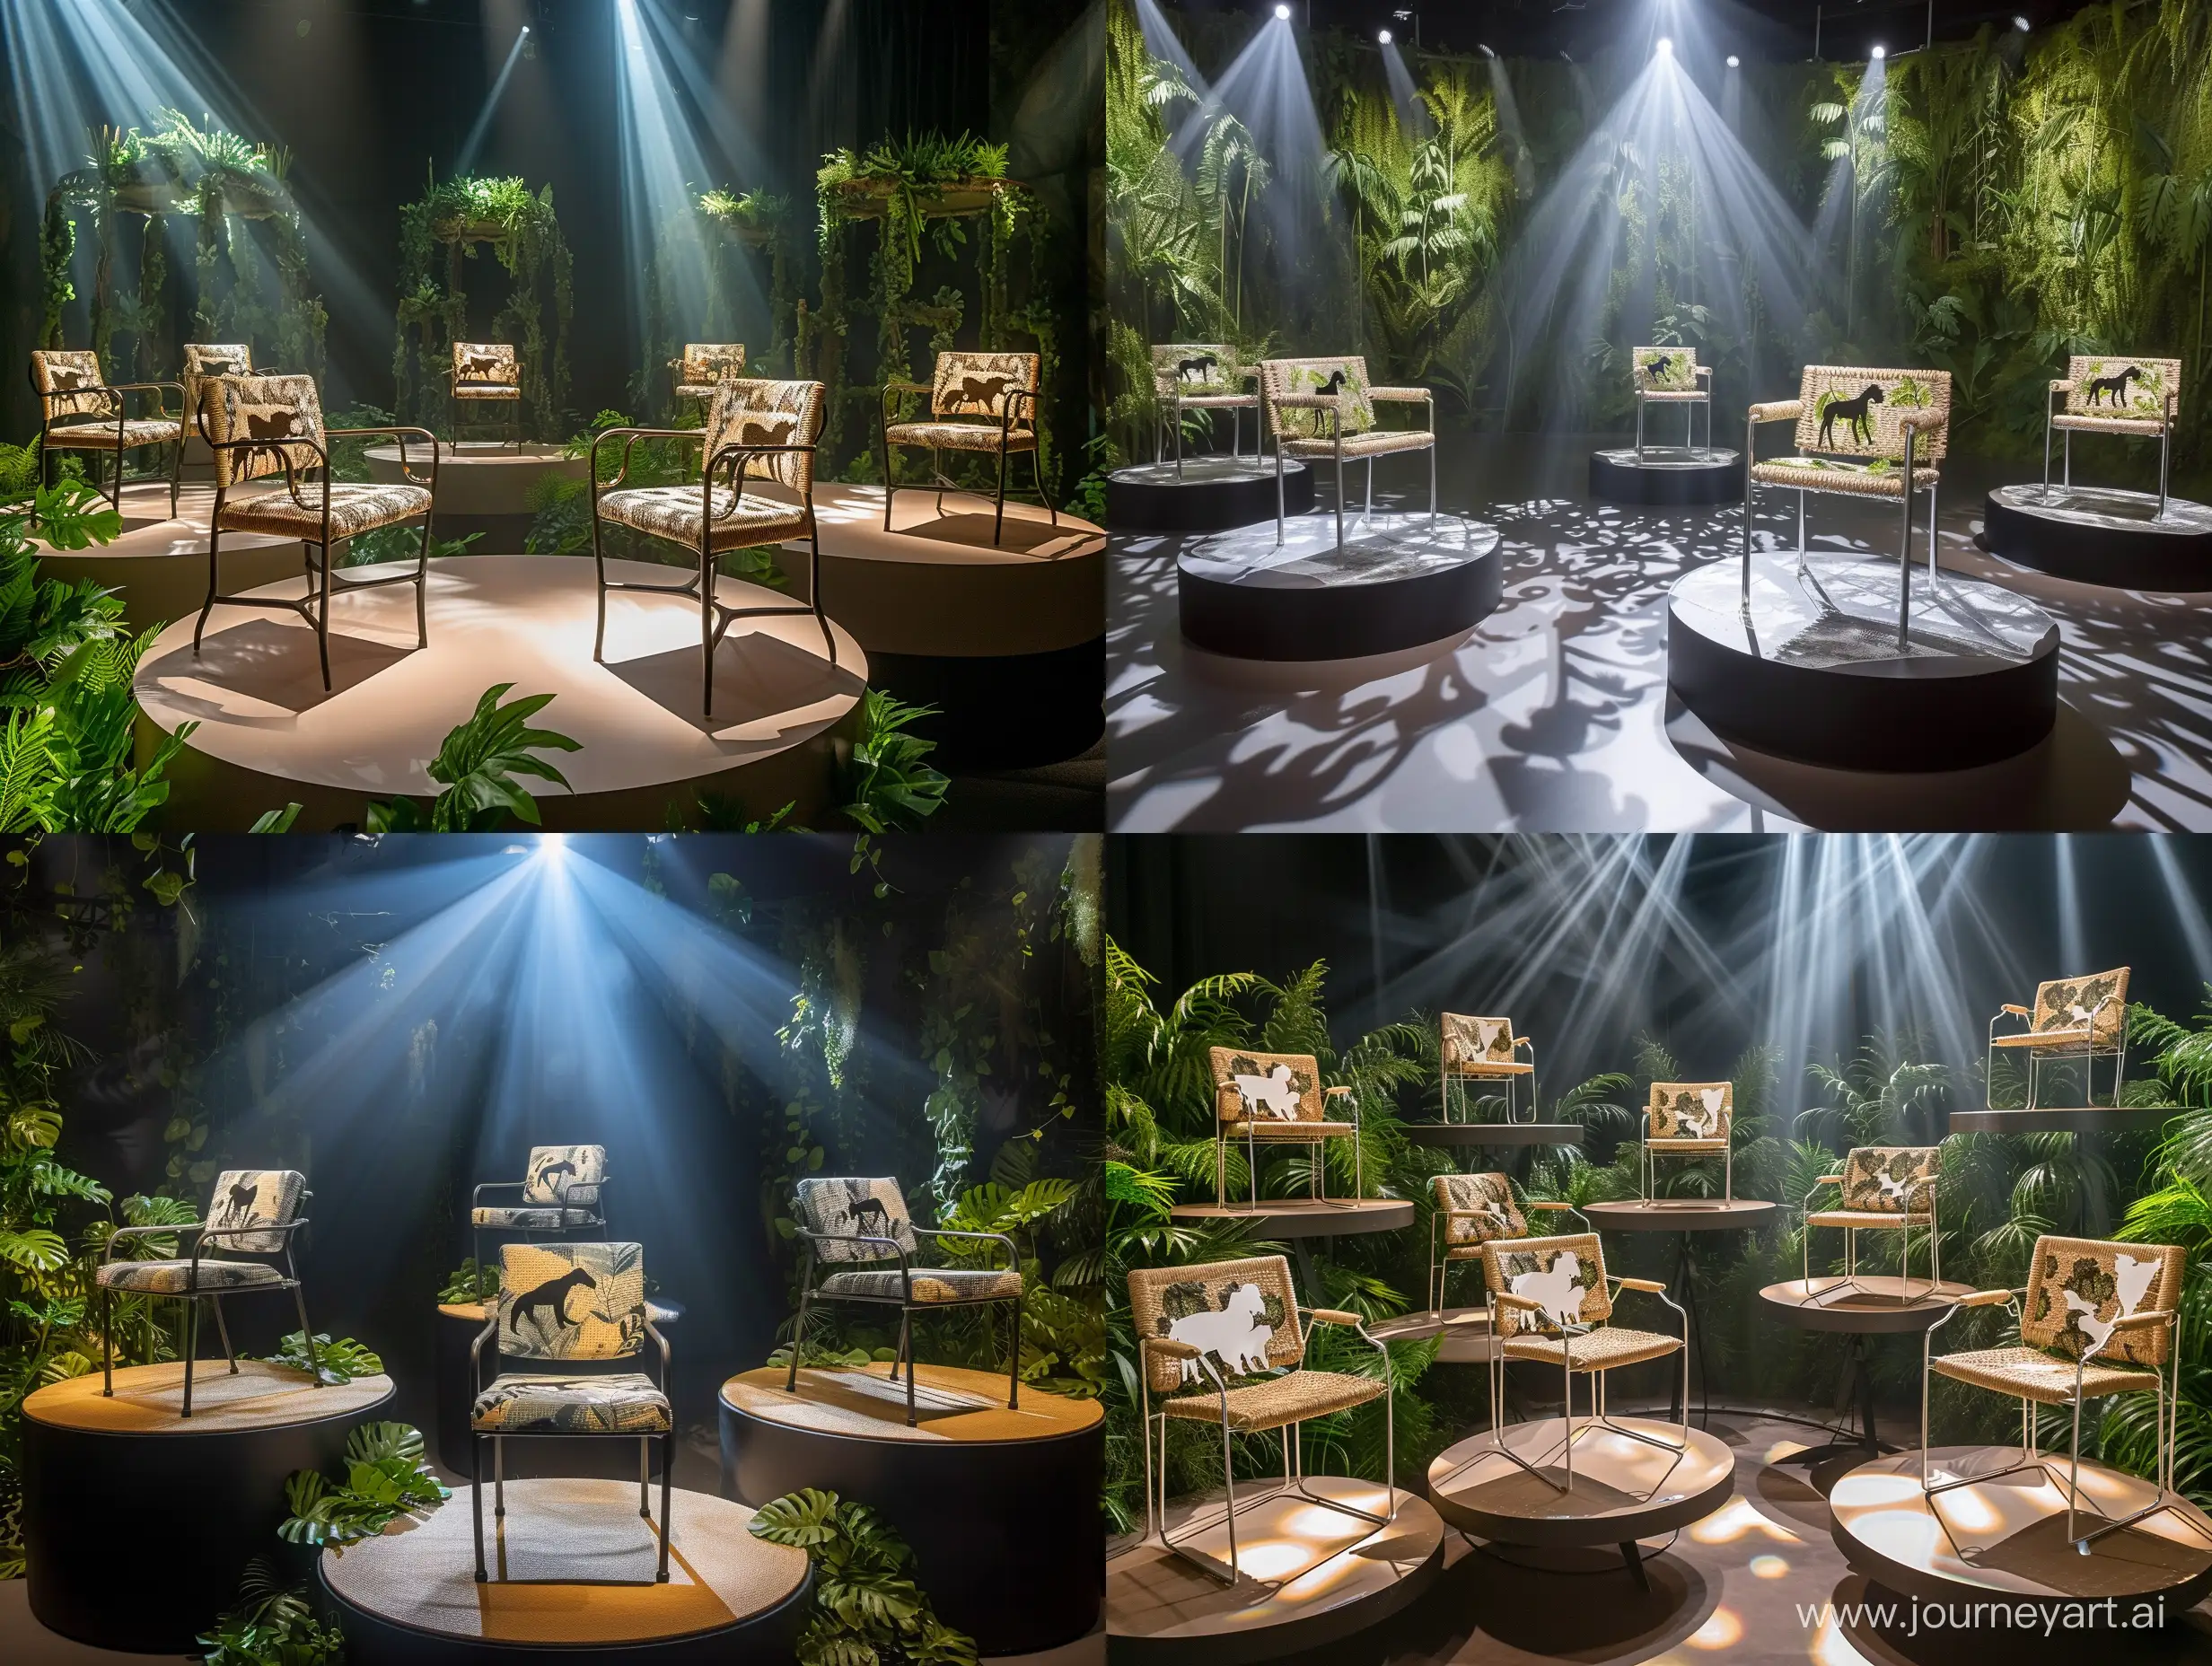 imagine imagine Safari Collection Display: As the centerpiece of the showroom, this zone captivates with its arrangement of chairs (each weighing approx. 1kg), placed on circular platforms amid lifelike faux foliage. The display evokes the wild beauty of the savannah under spotlights that mimic the natural sunlight, highlighting the recycled aluminum frames and woven plant fiber seats of each chair, complete with animal silhouettes.realistic style"realistic style